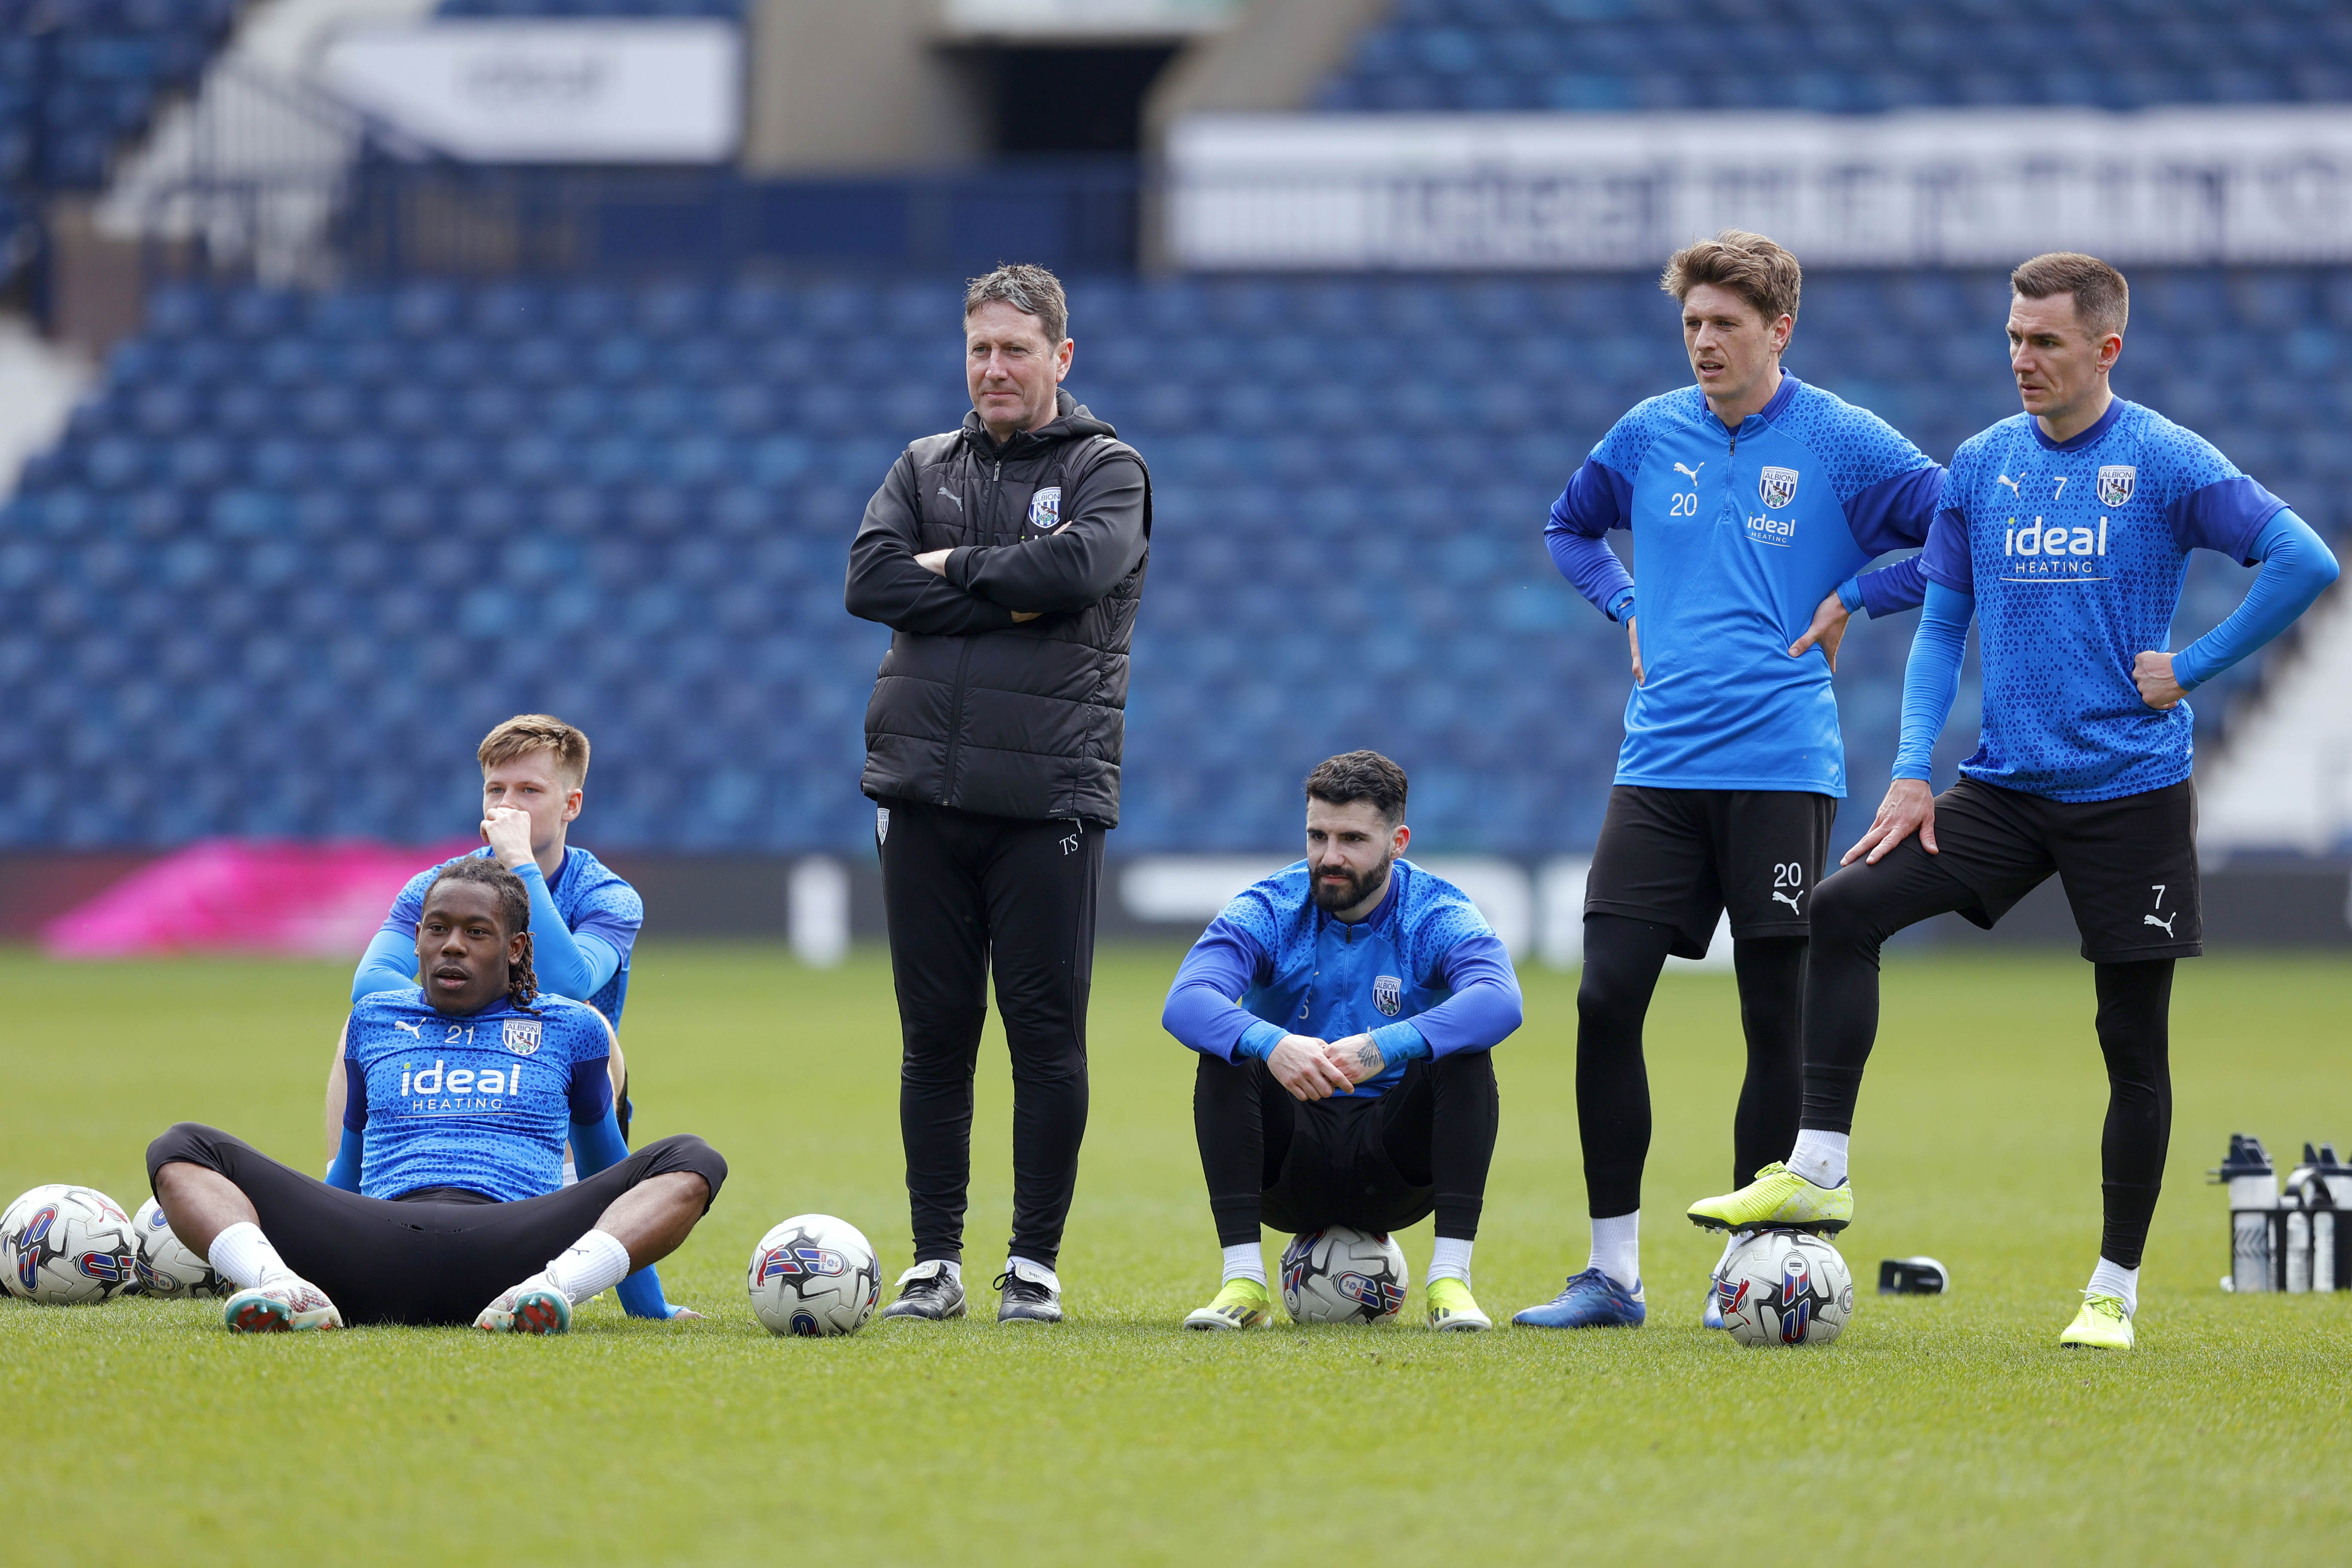 Some Albion players sit on the floor while others stand and watch during a pause in the session at The Hawthorns